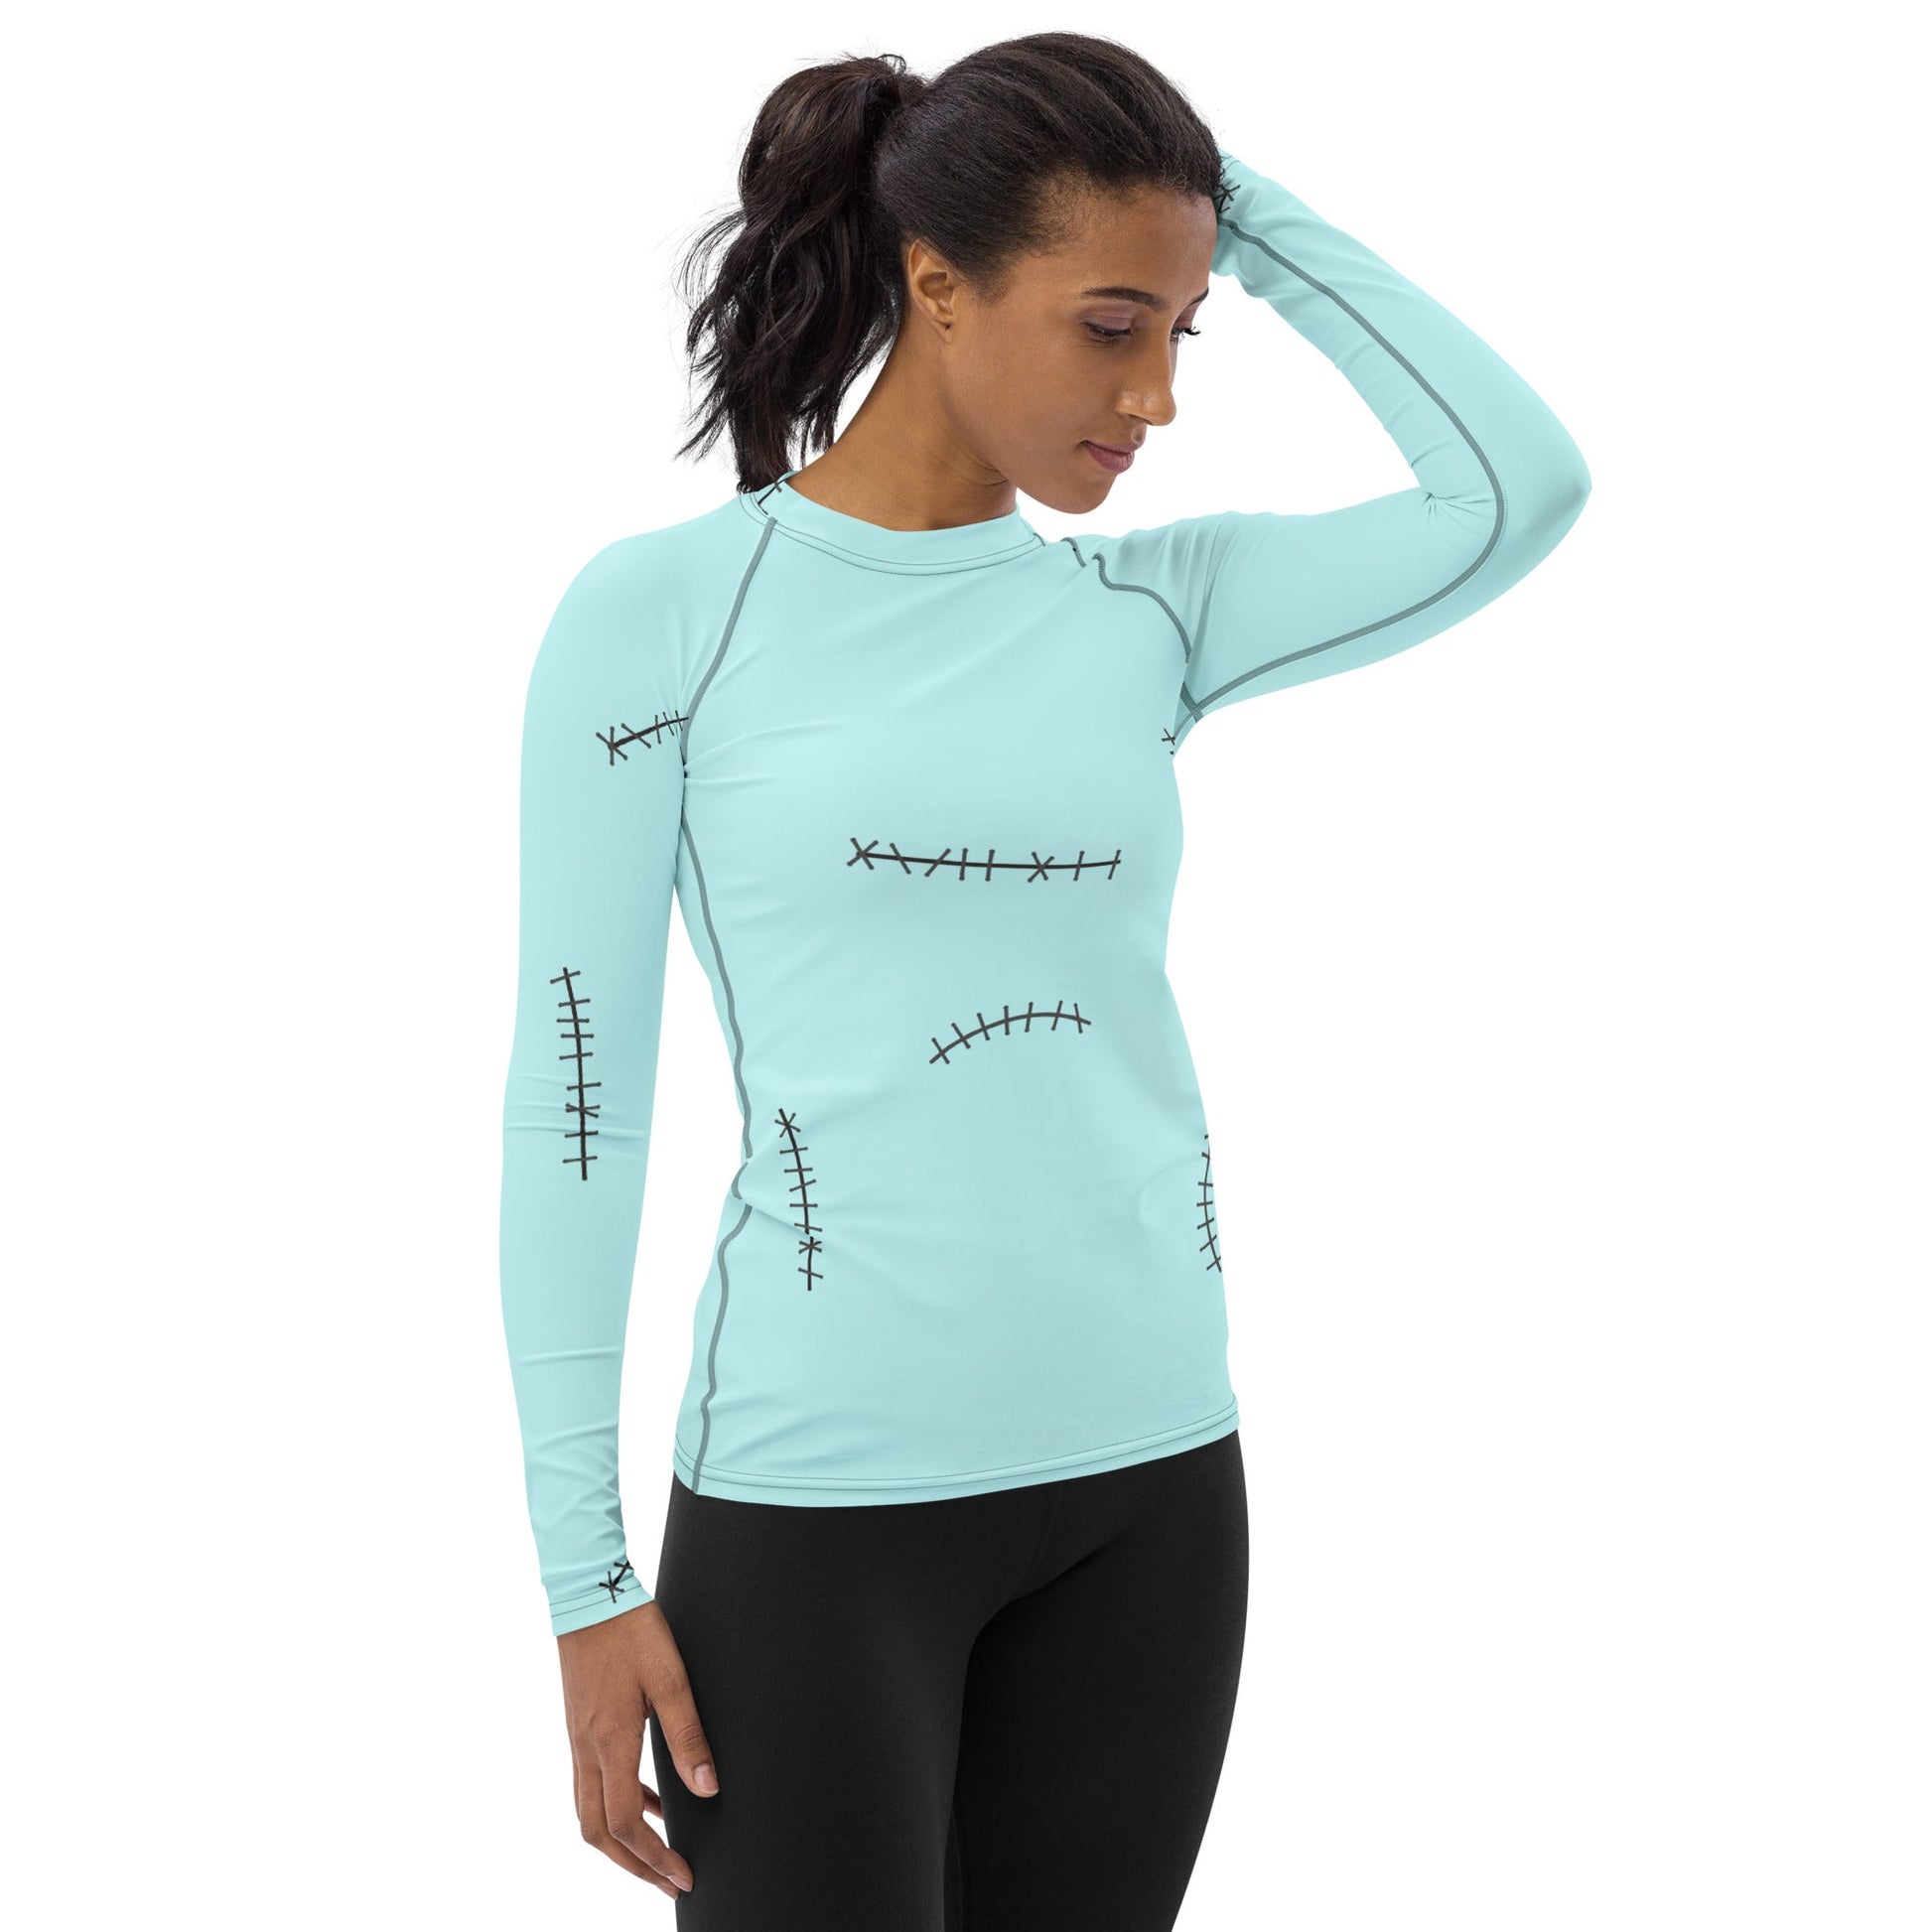 Sally Skin Women's Rash Guard active wearboo to youchristmas#tag4##tag5##tag6#